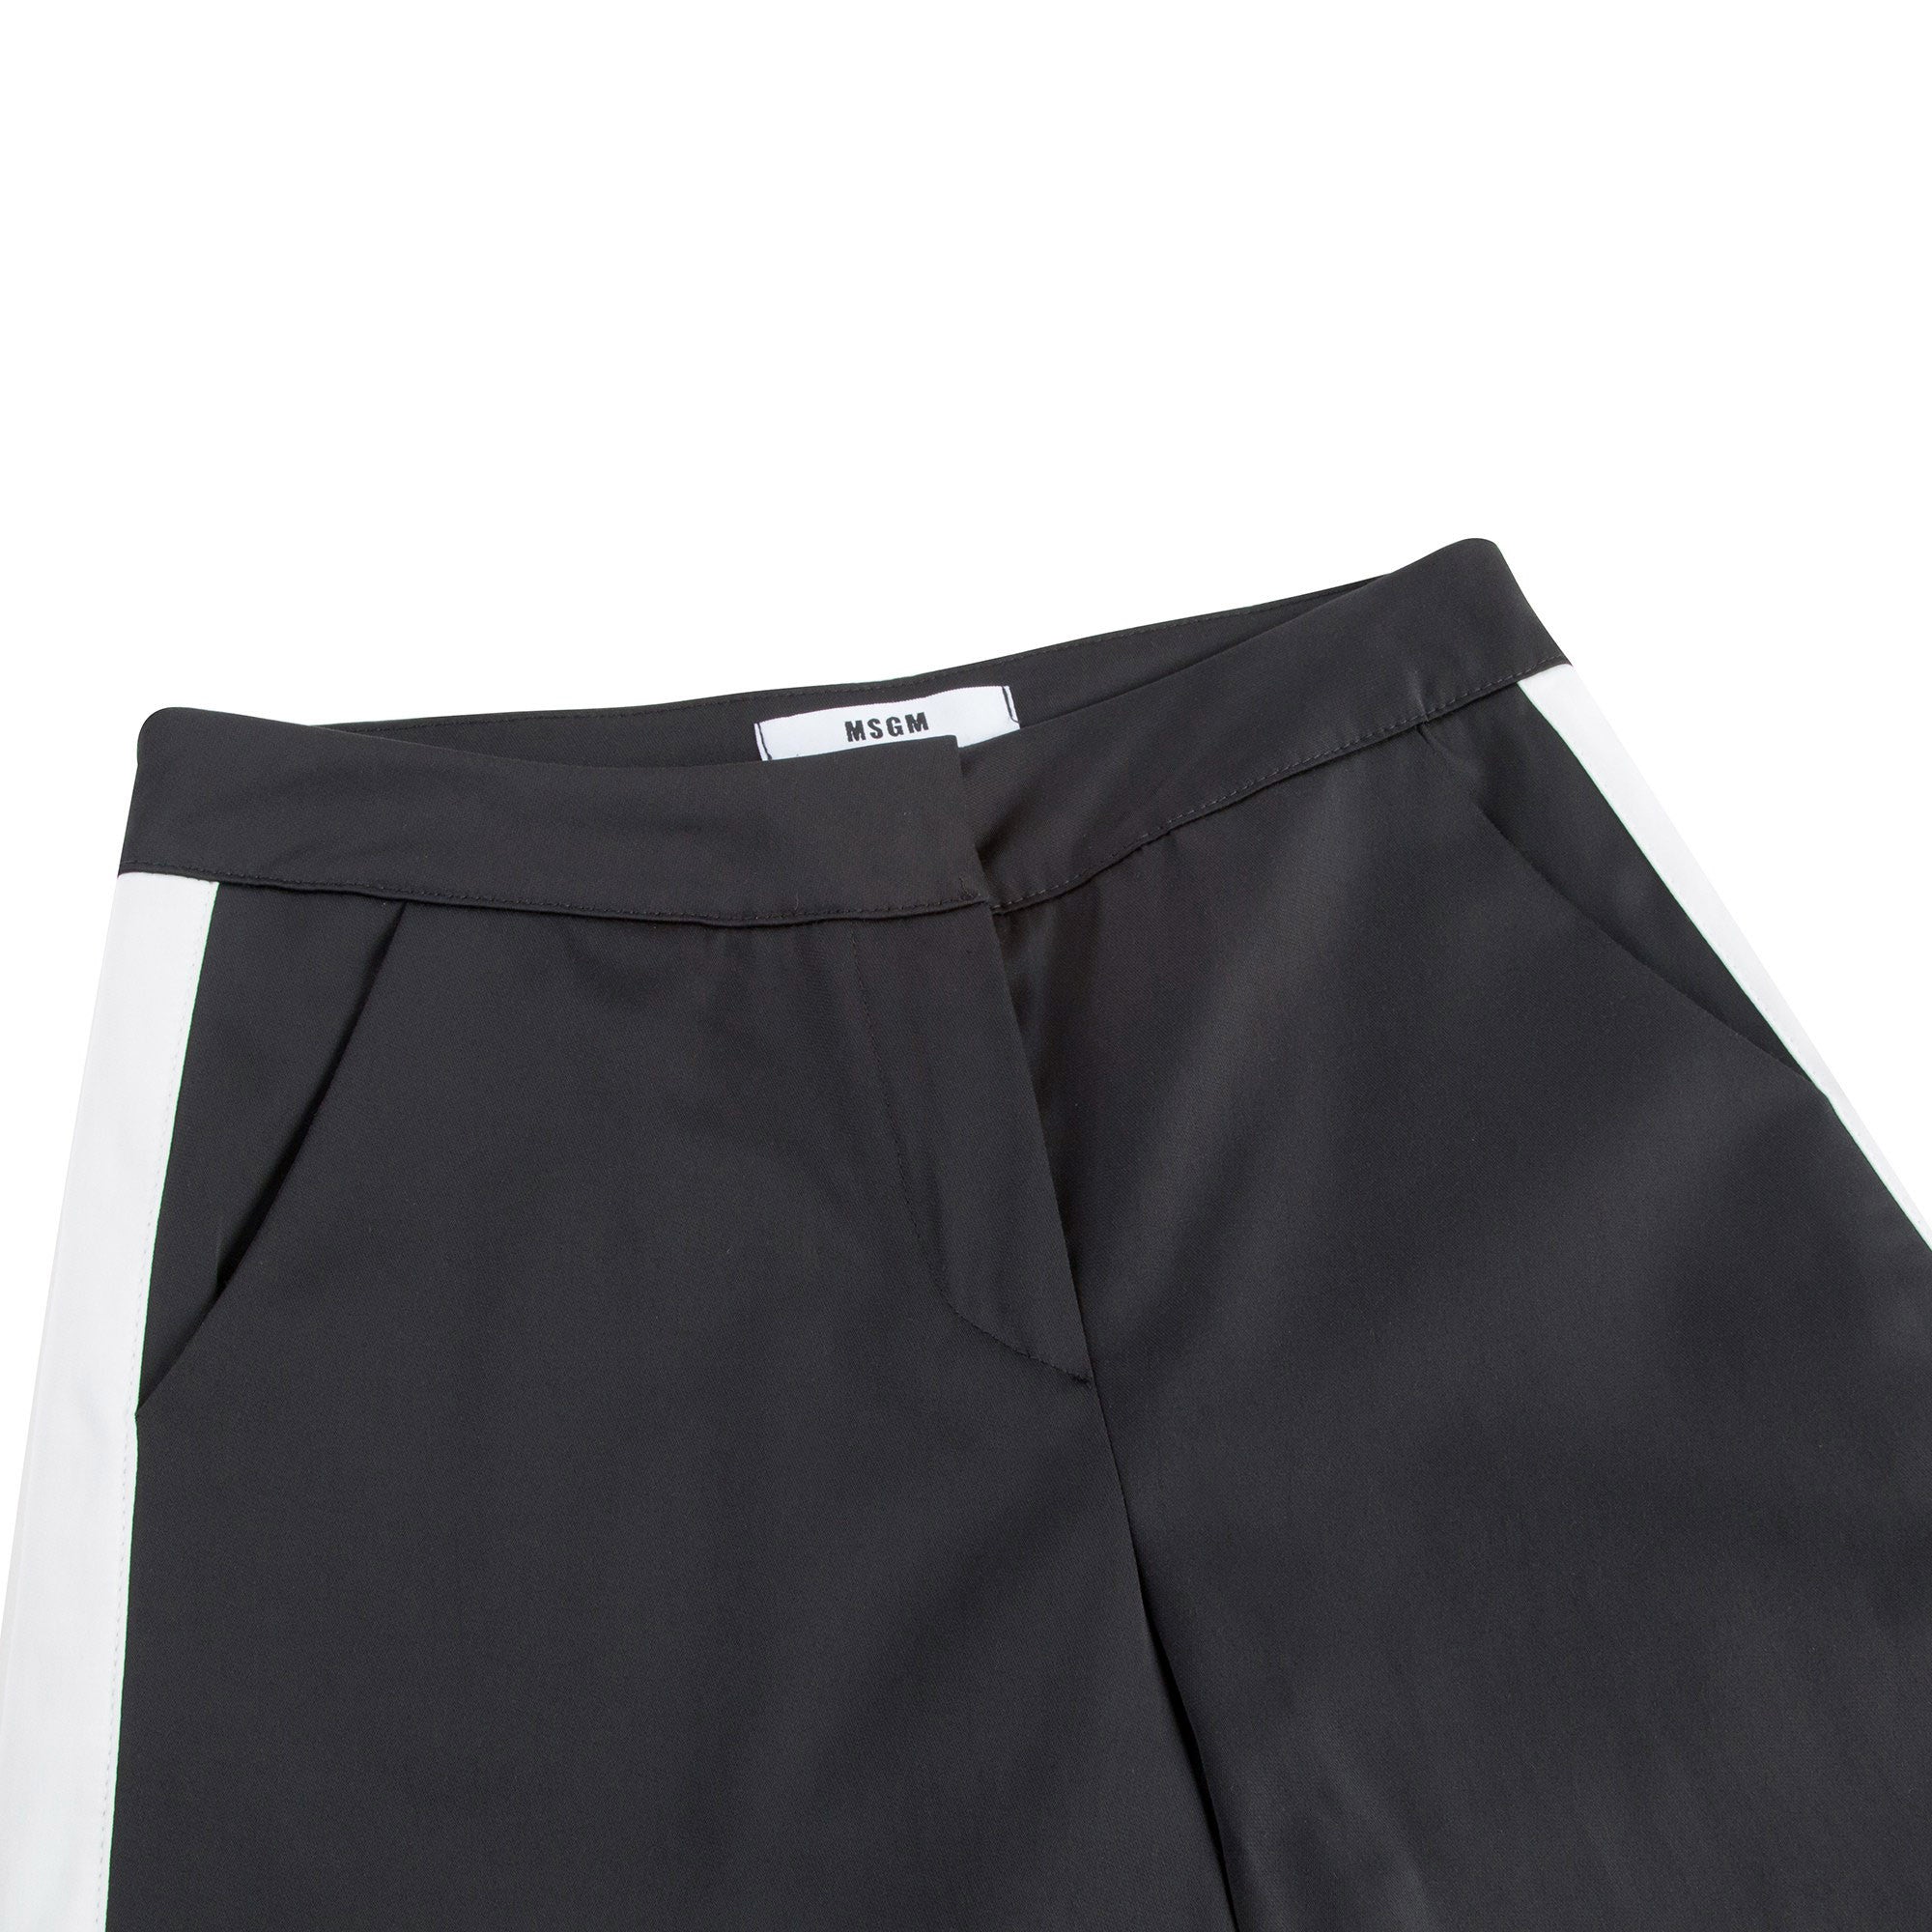 Girls Black Trousers With White Trim